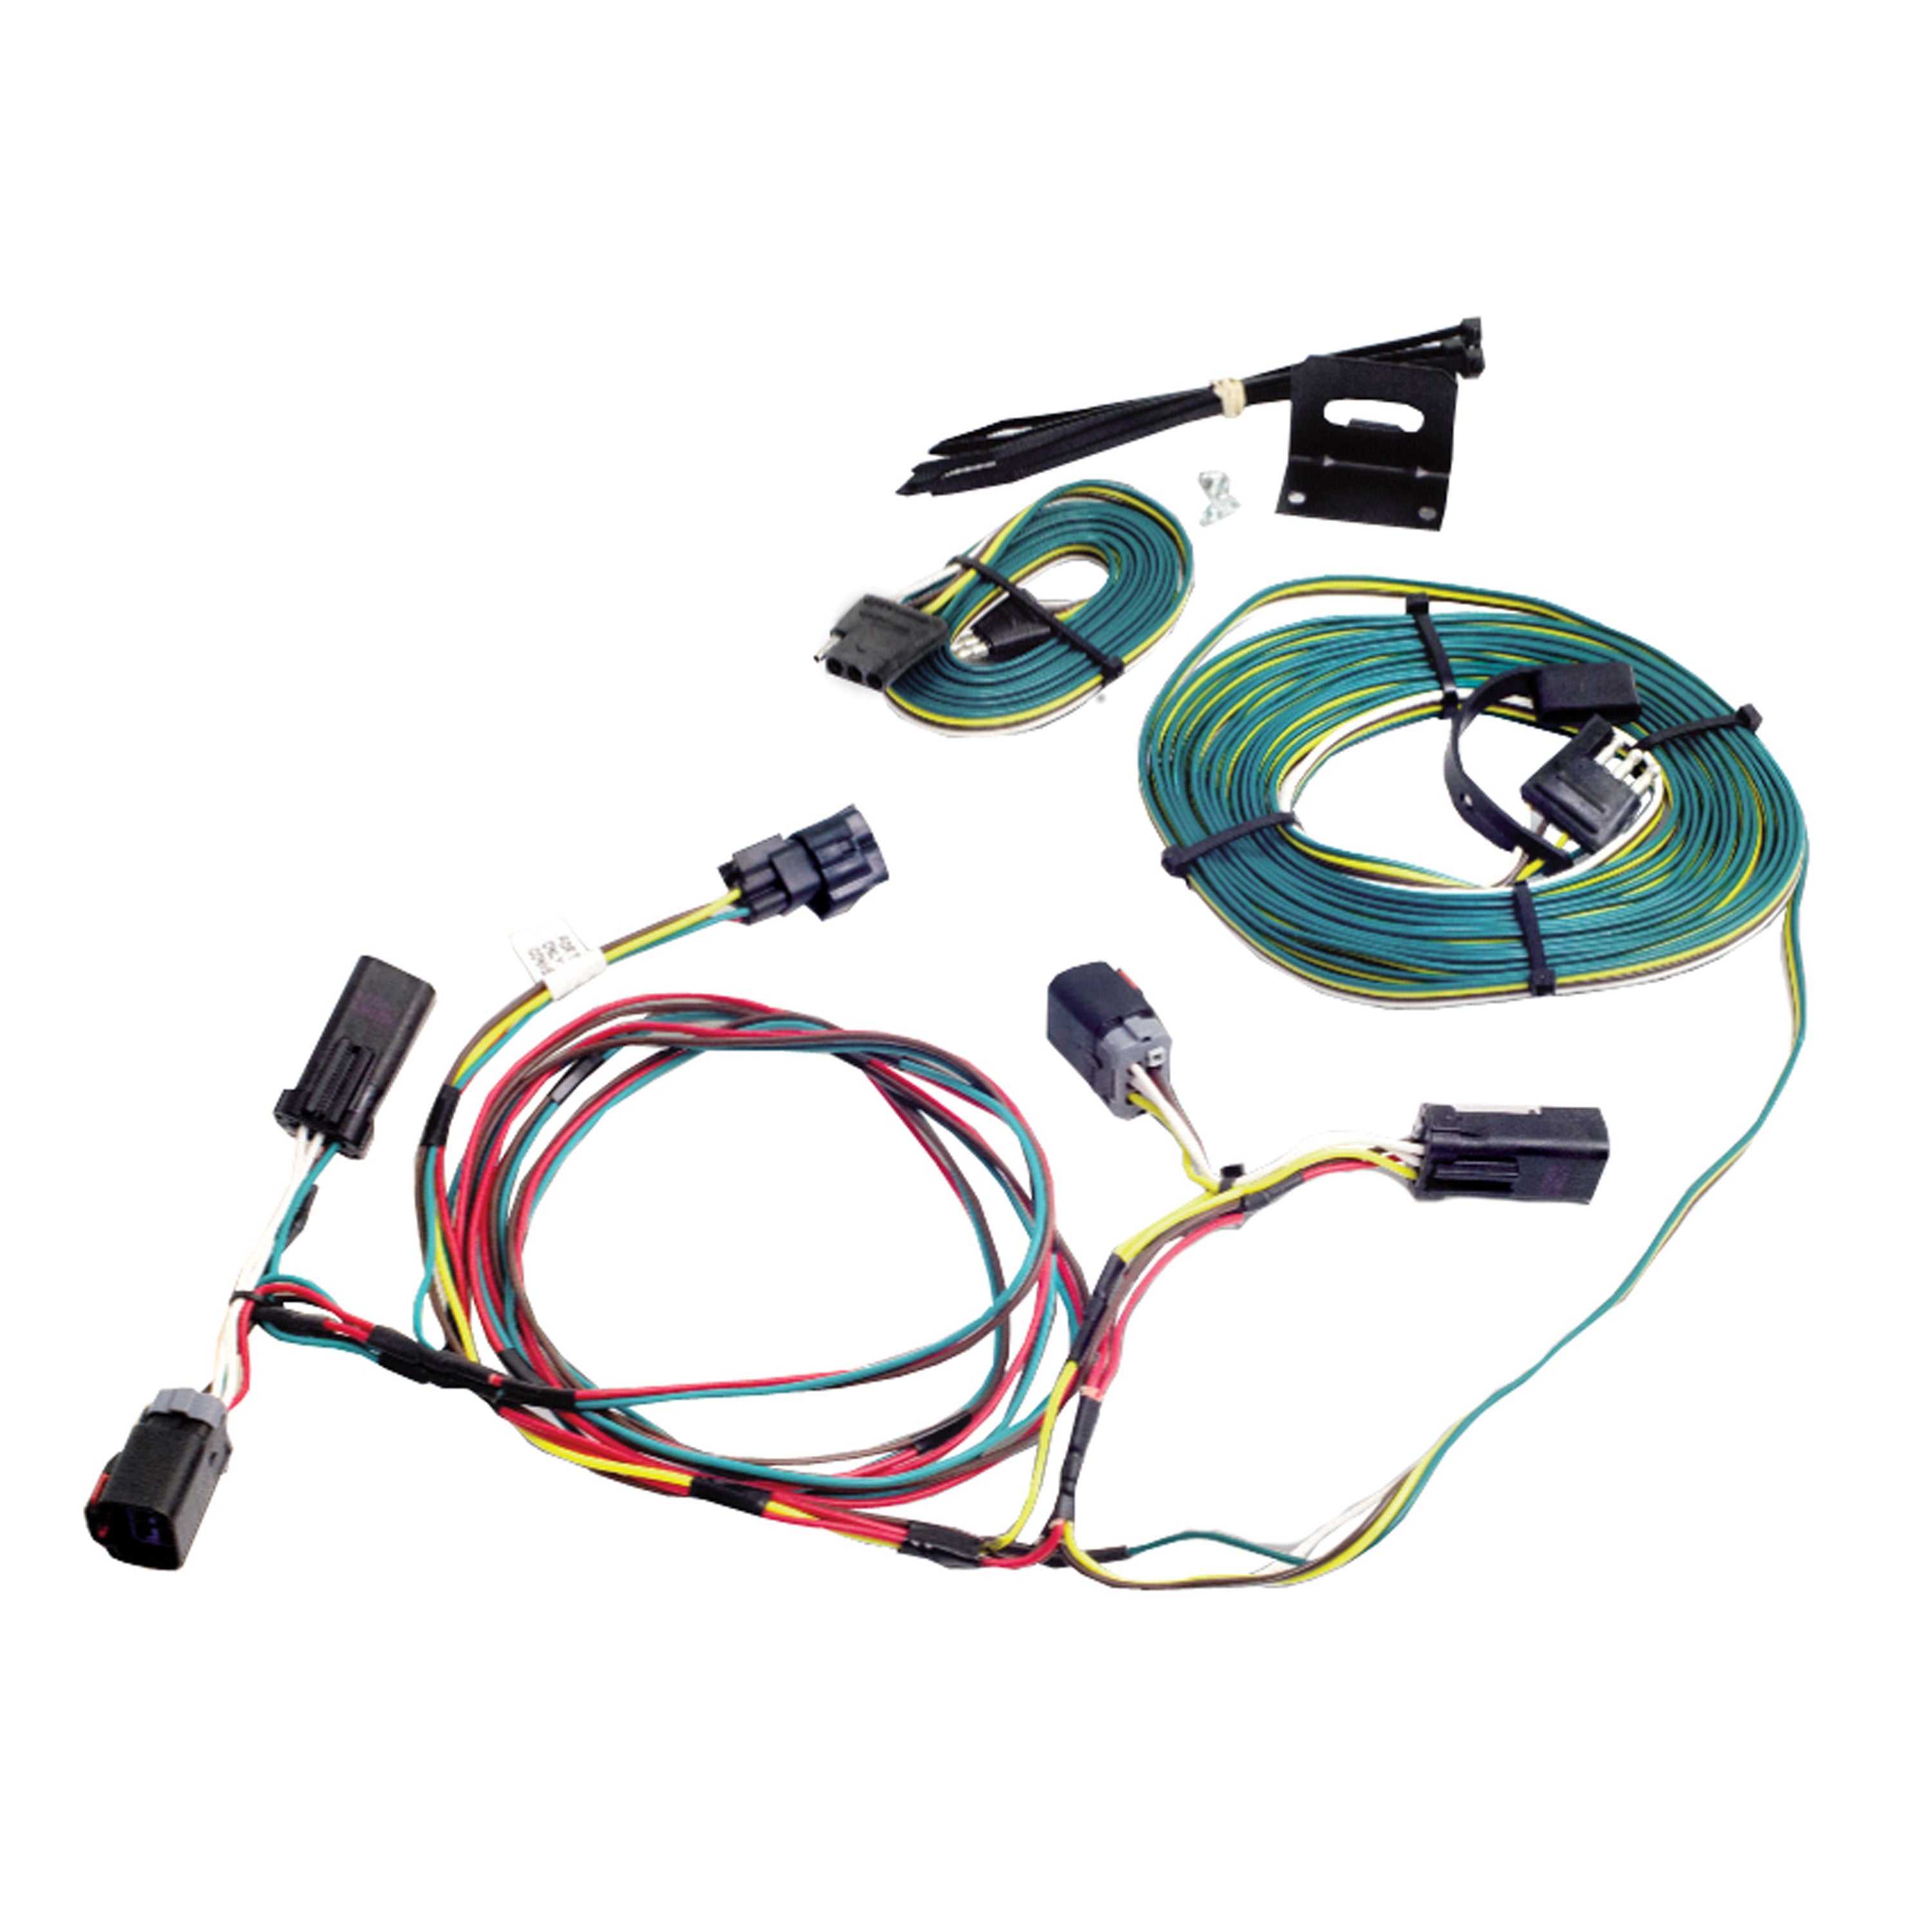 Demco 9523082 Towed Connector Vehicle Wiring Kit - For Ford Fusion '06-'12